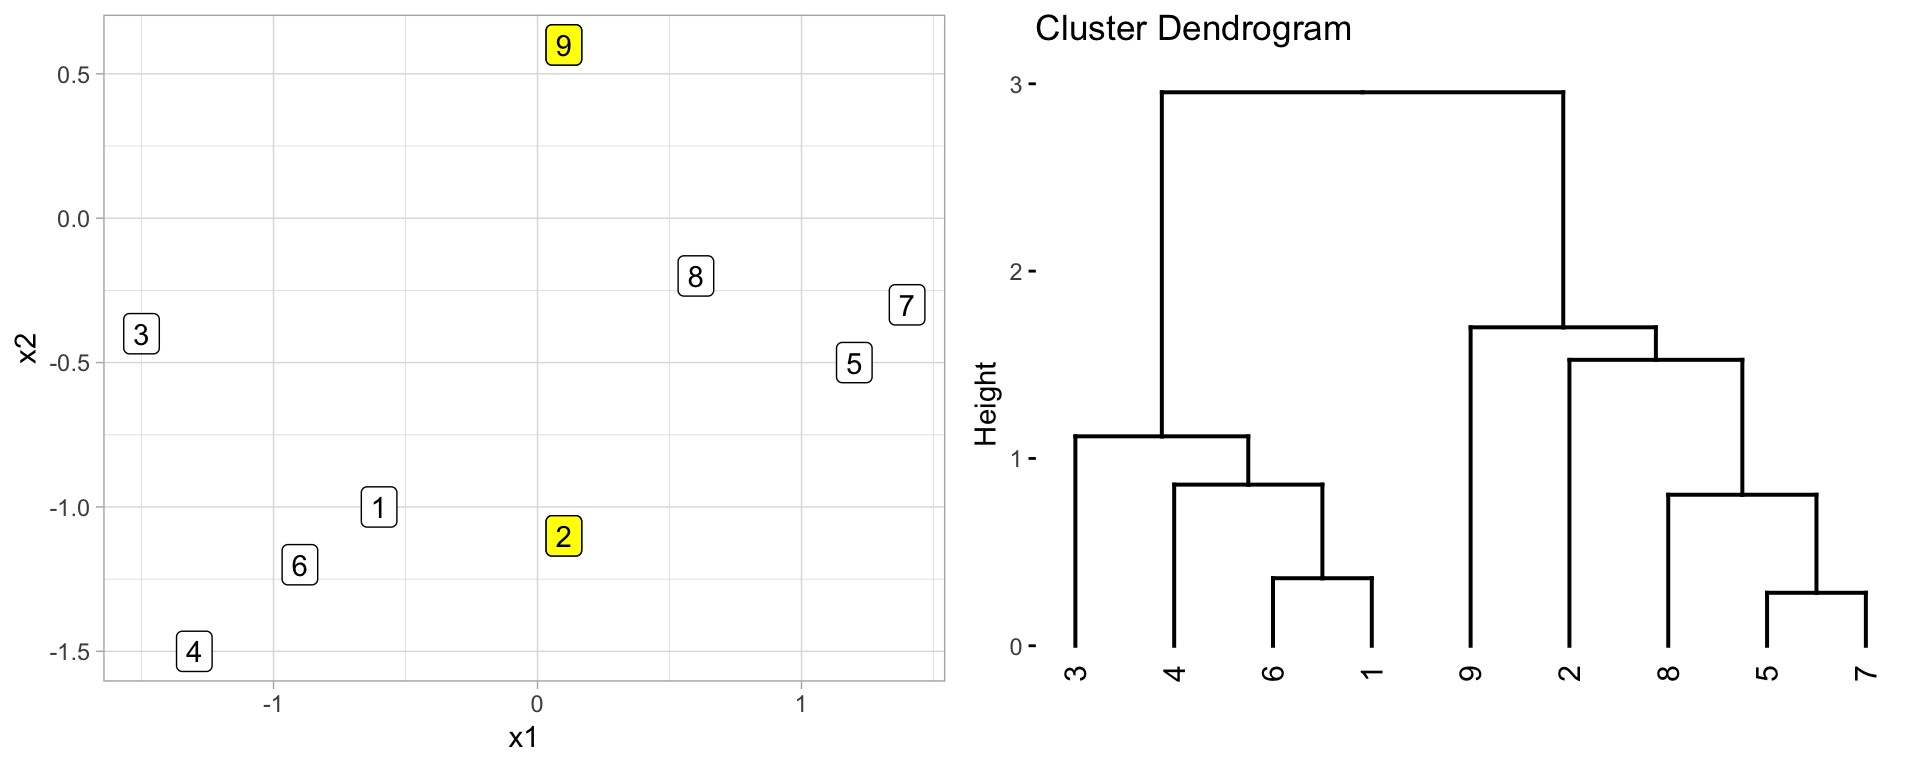 Comparison of nine observations measured across two features (left) and the resulting dendrogram created based on hierarchical clustering (right).